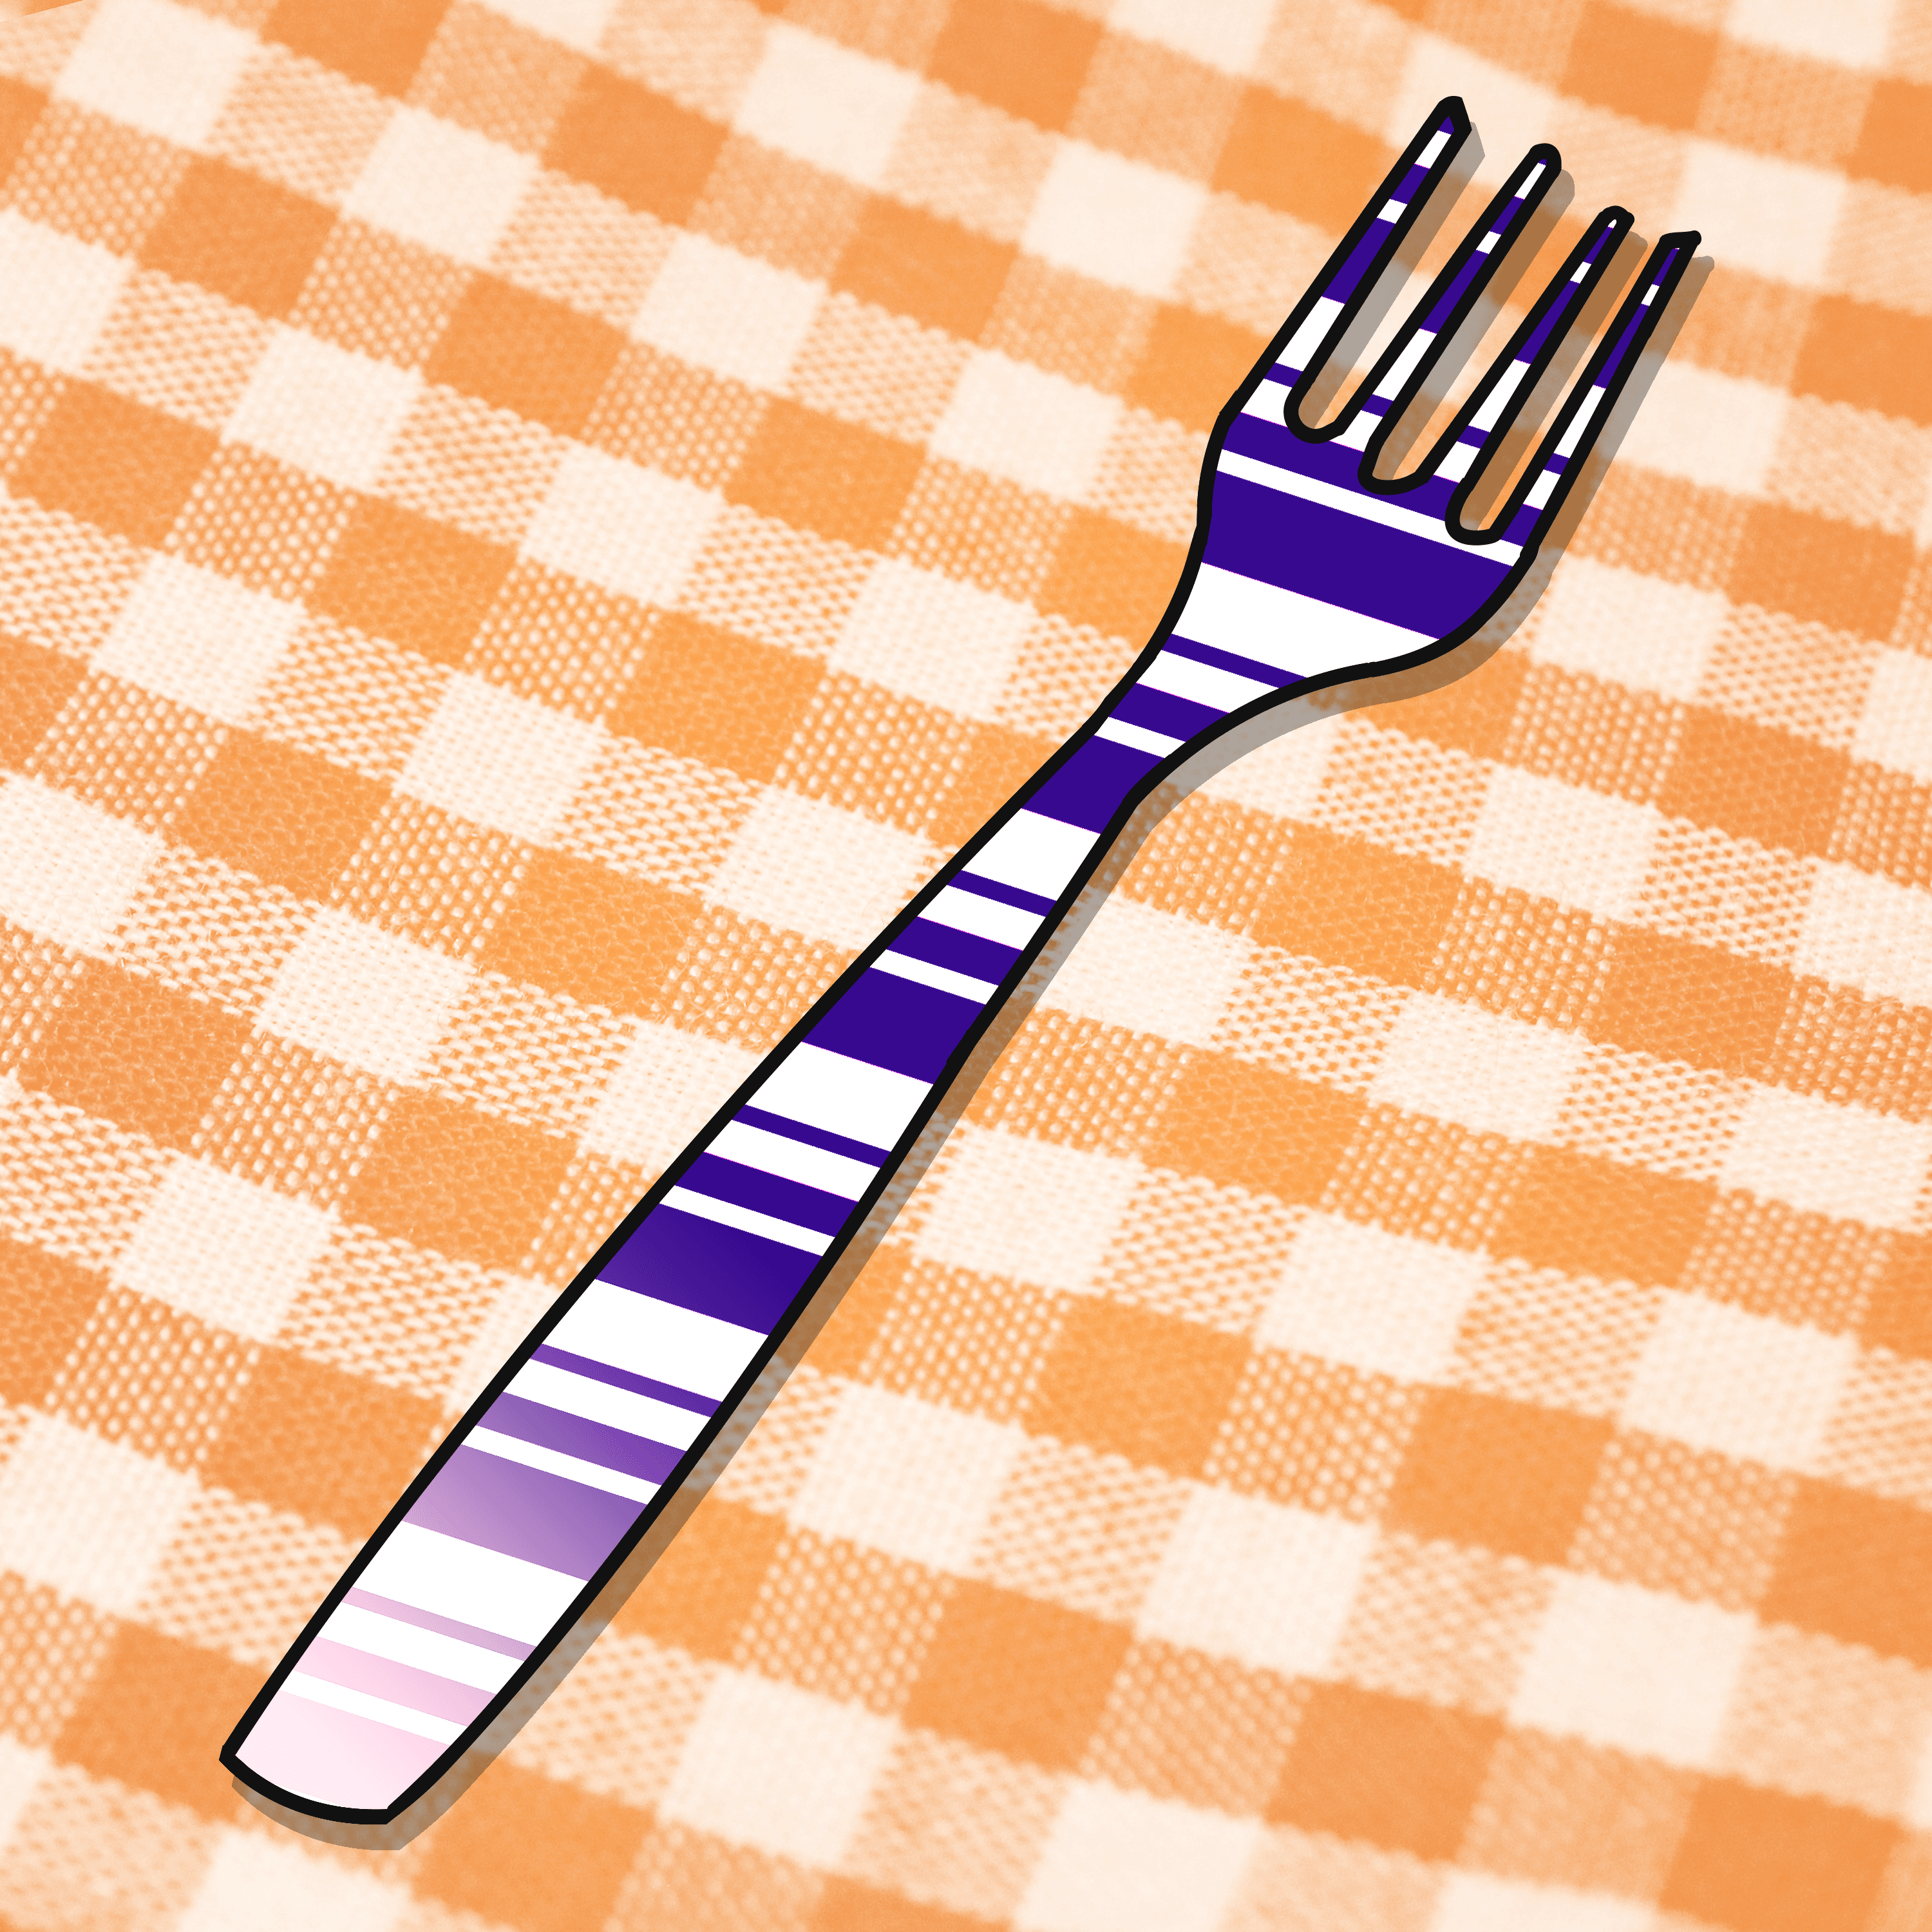 Mary's Favorite Fork (Non-Fungible Fork #63)